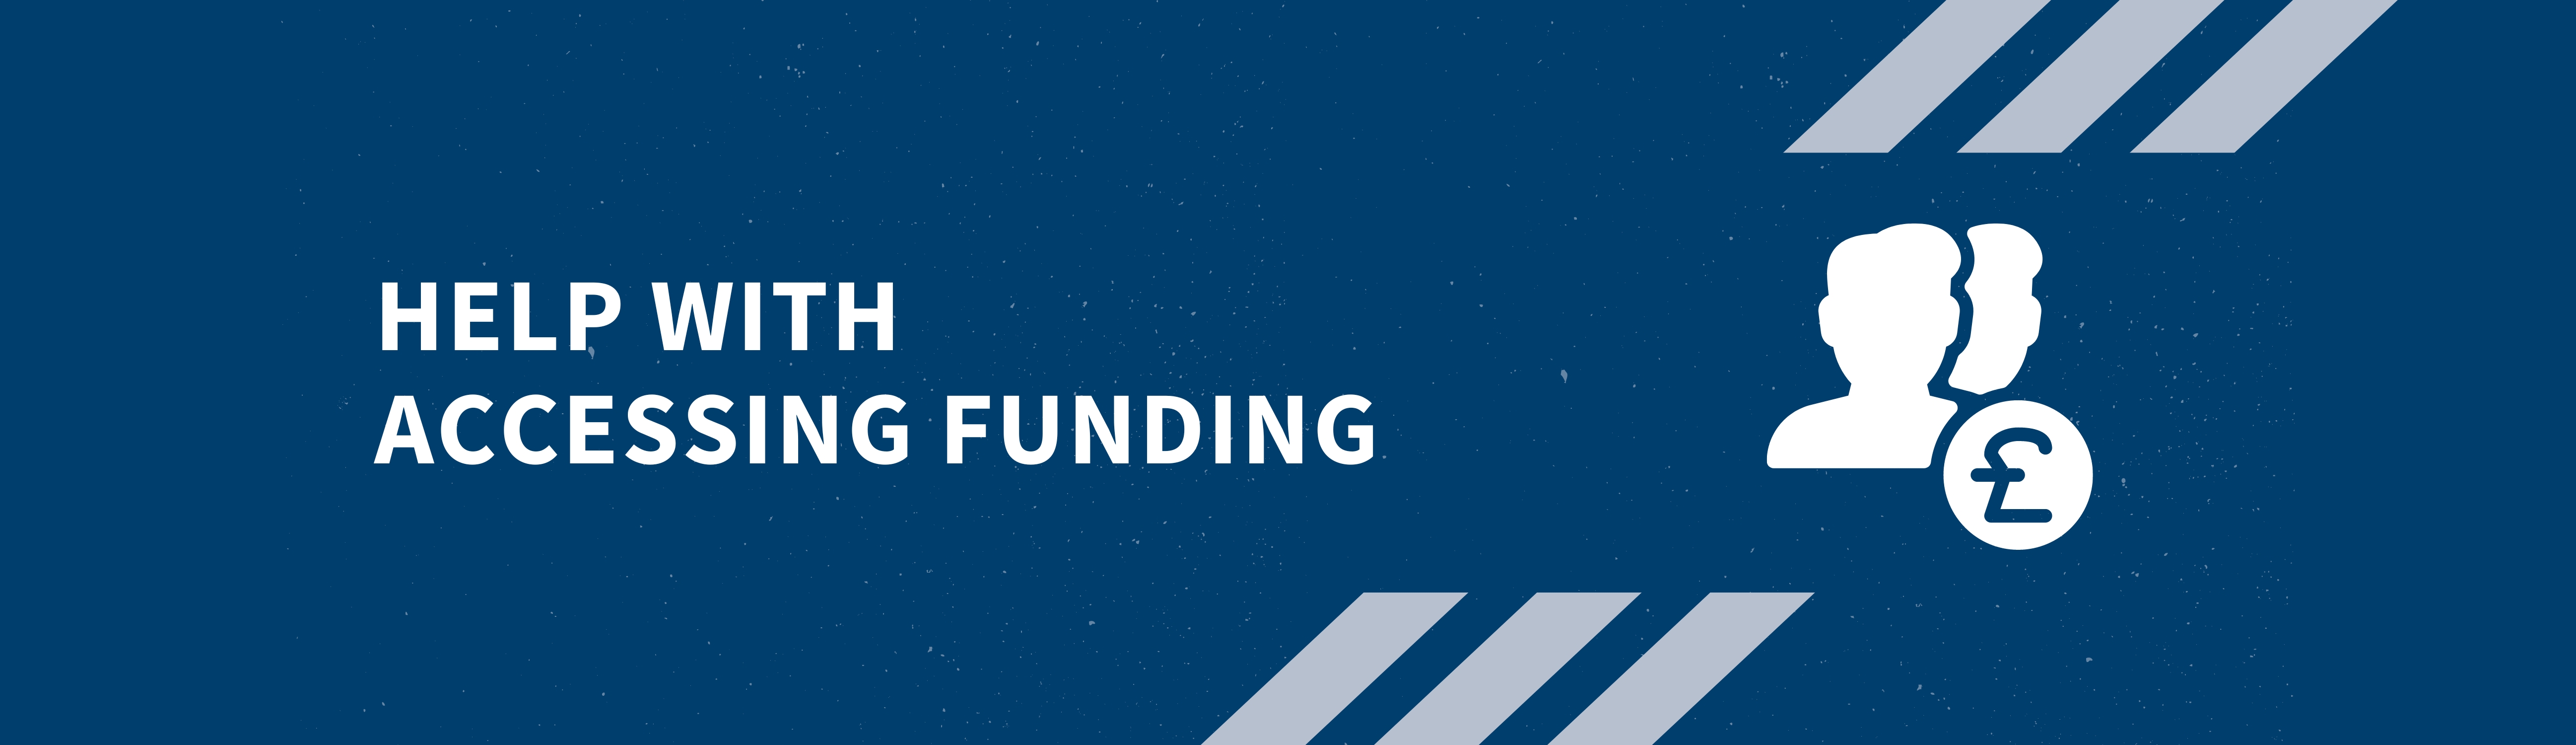 Help with accessing funding banner